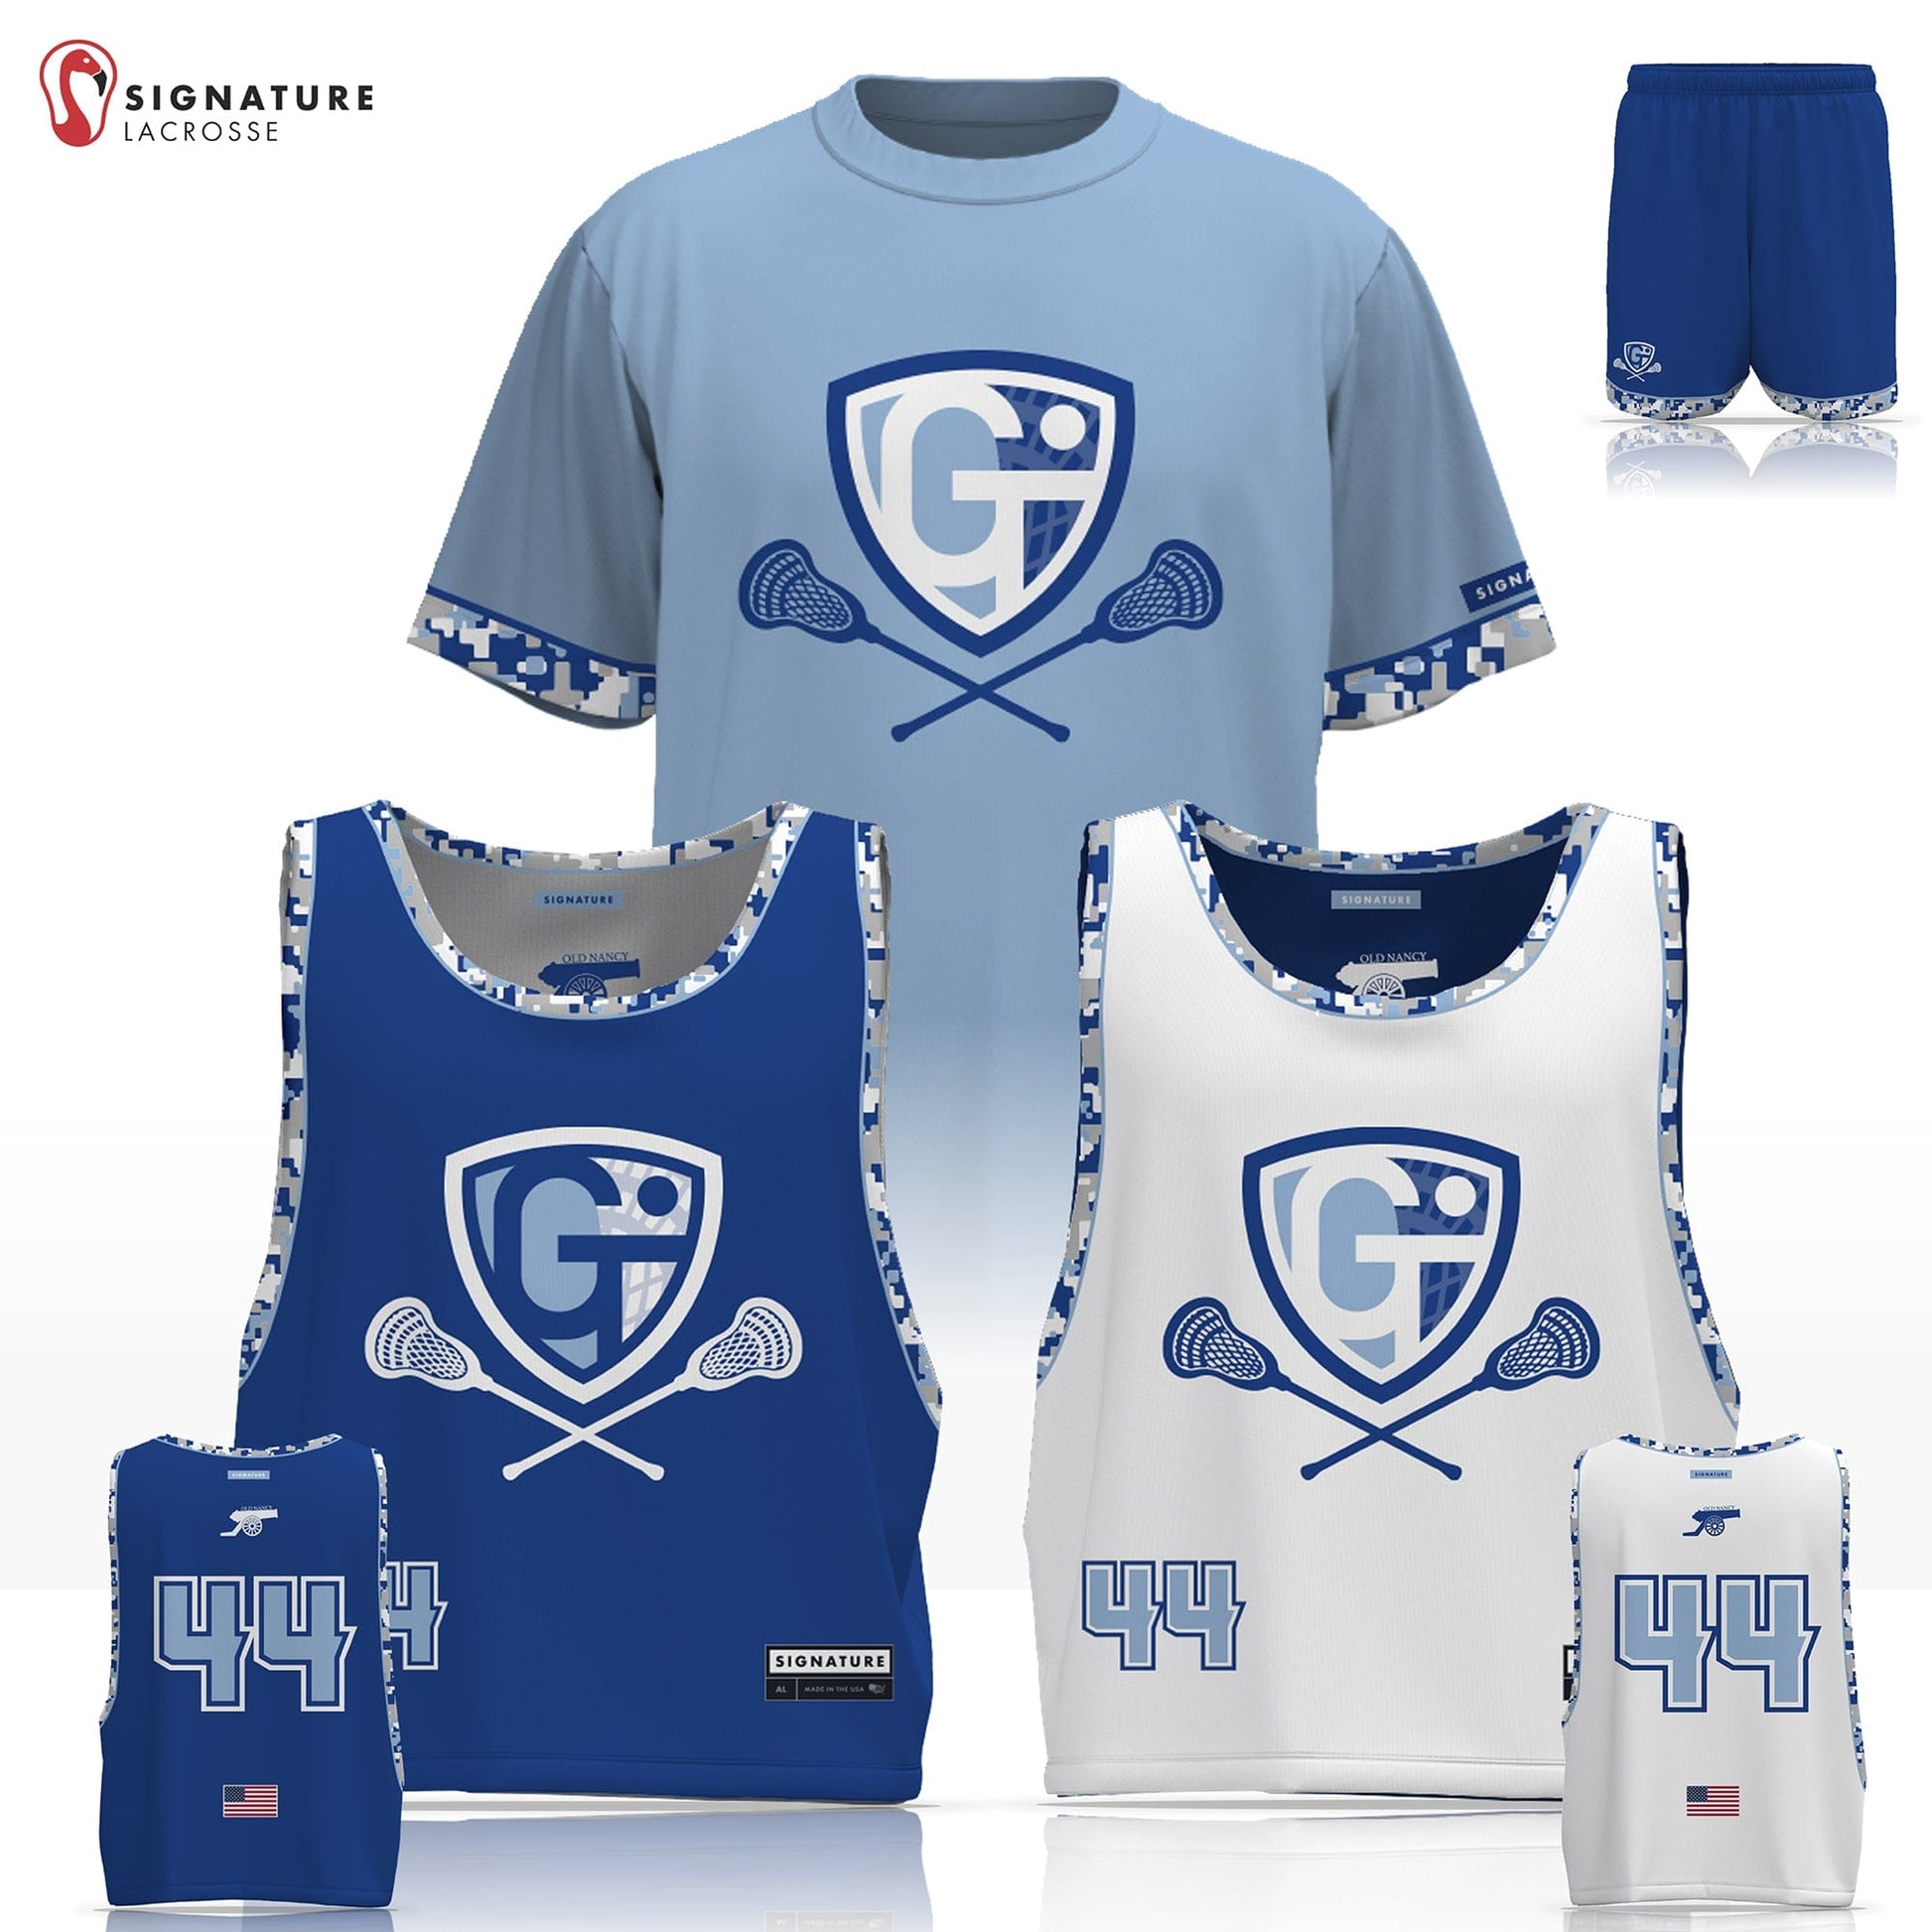 Georgetown-Triton Youth Lacrosse Men's 3 Piece Player Game Package: 7-8 Signature Lacrosse